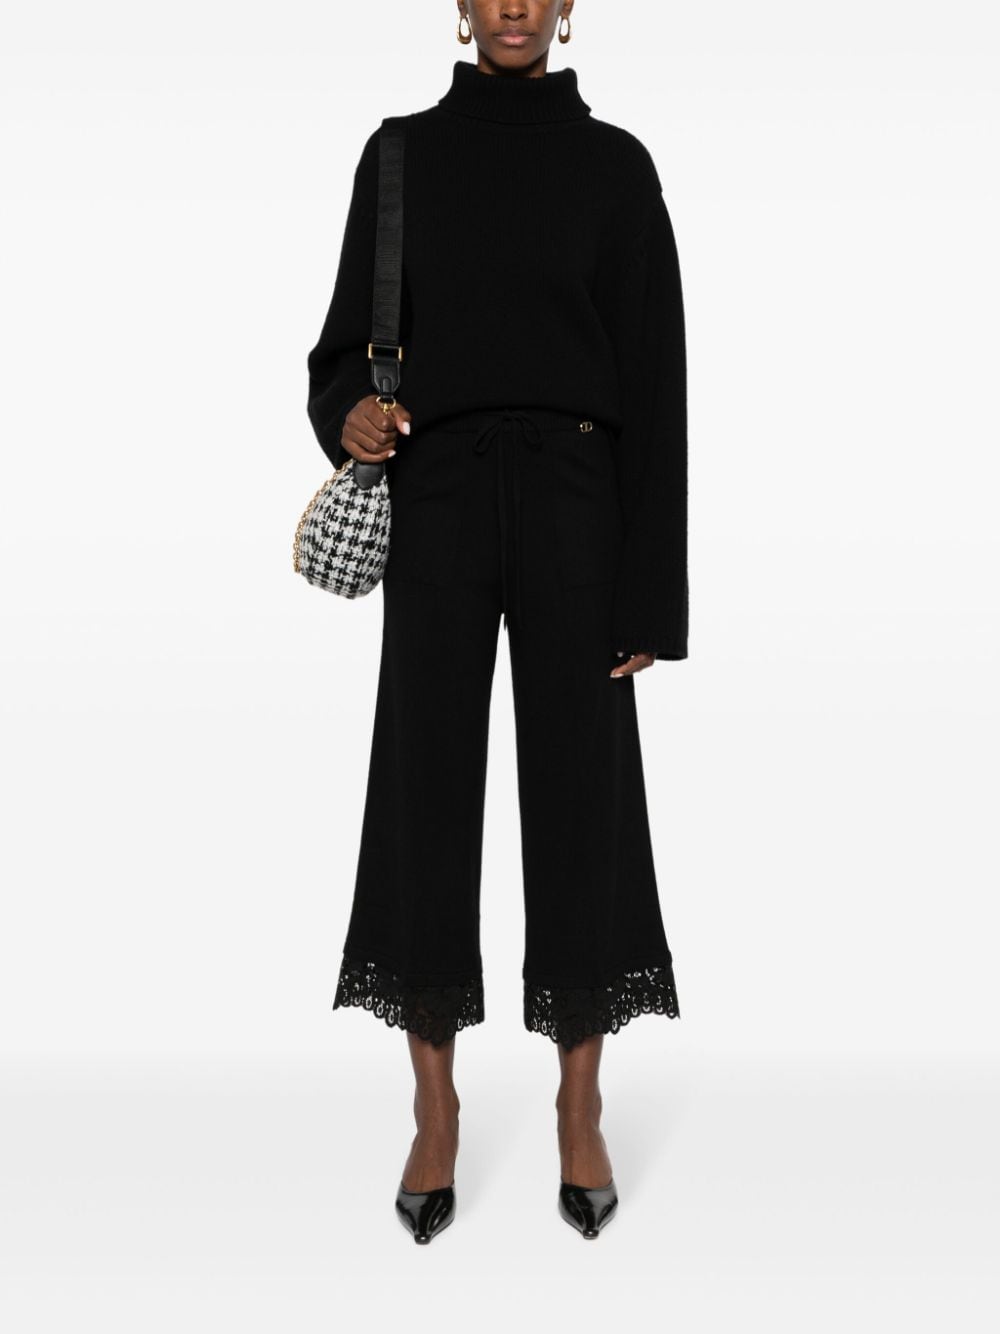 Lace-trim cropped trousers